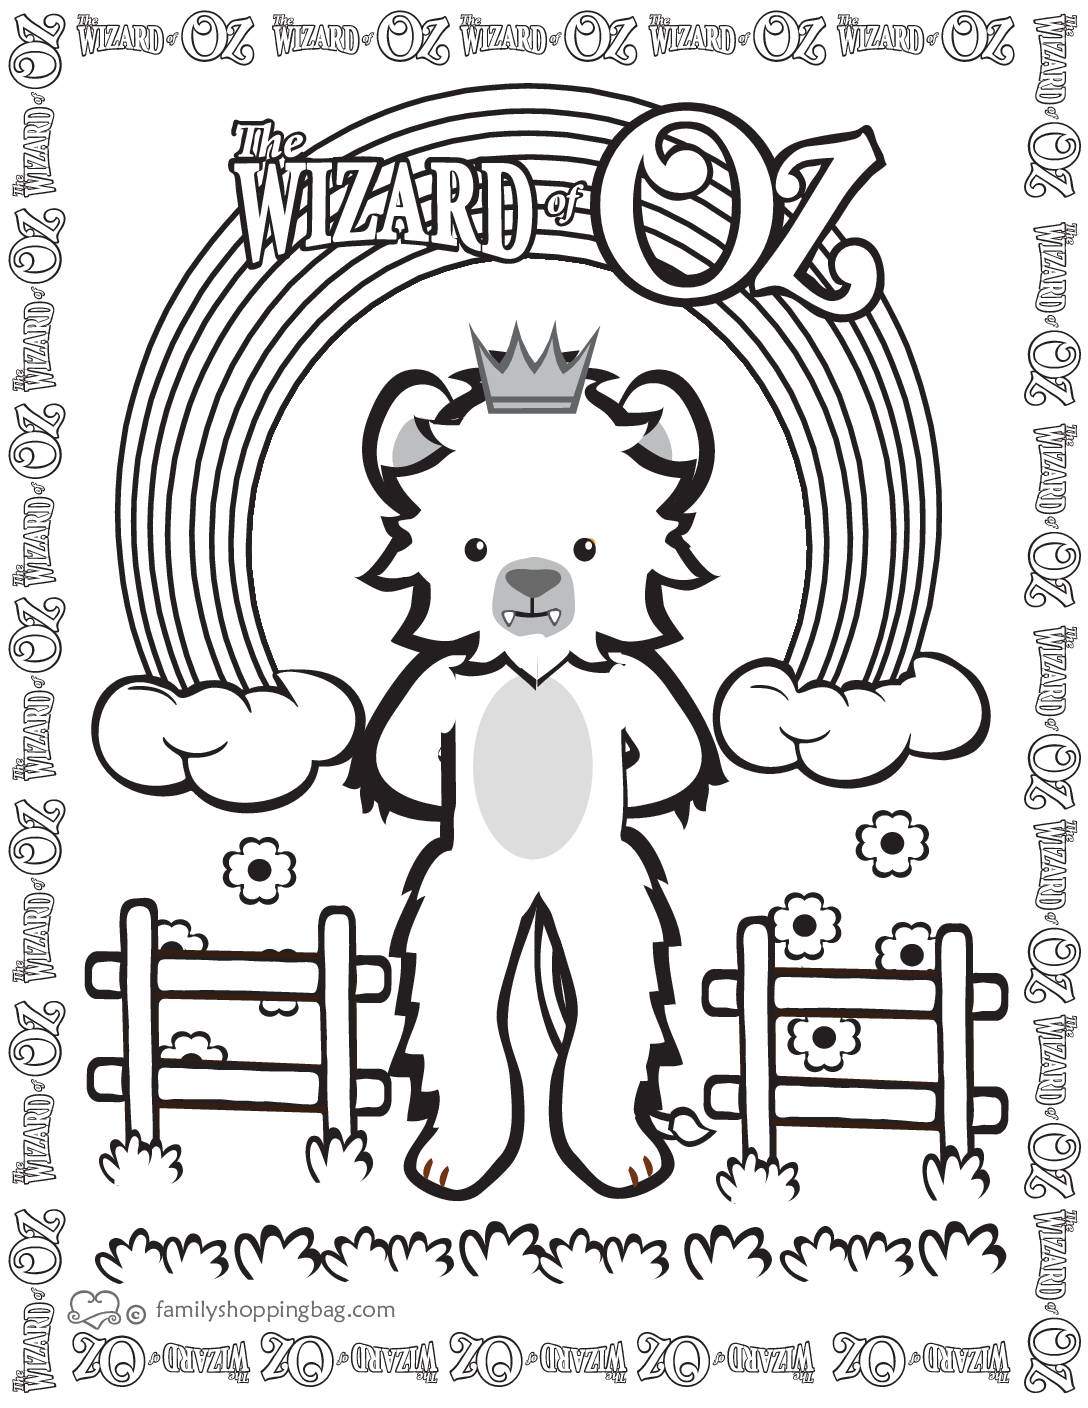 Coloring Page 7 Wizard of Oz